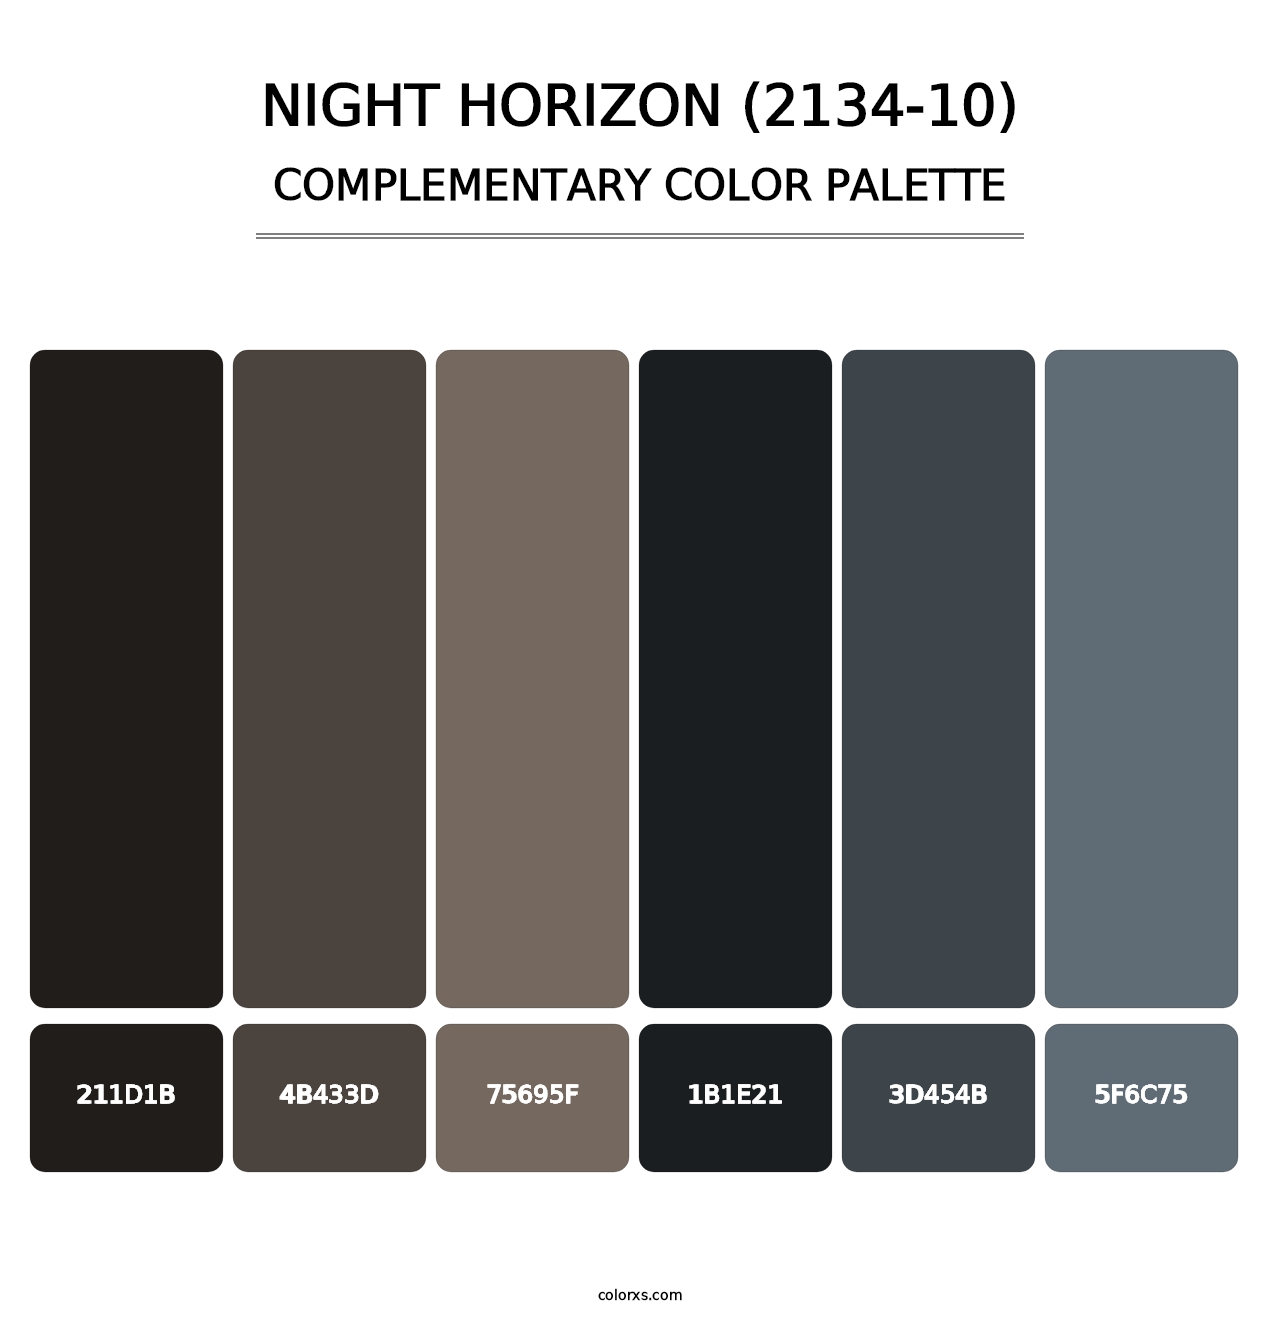 Night Horizon (2134-10) - Complementary Color Palette